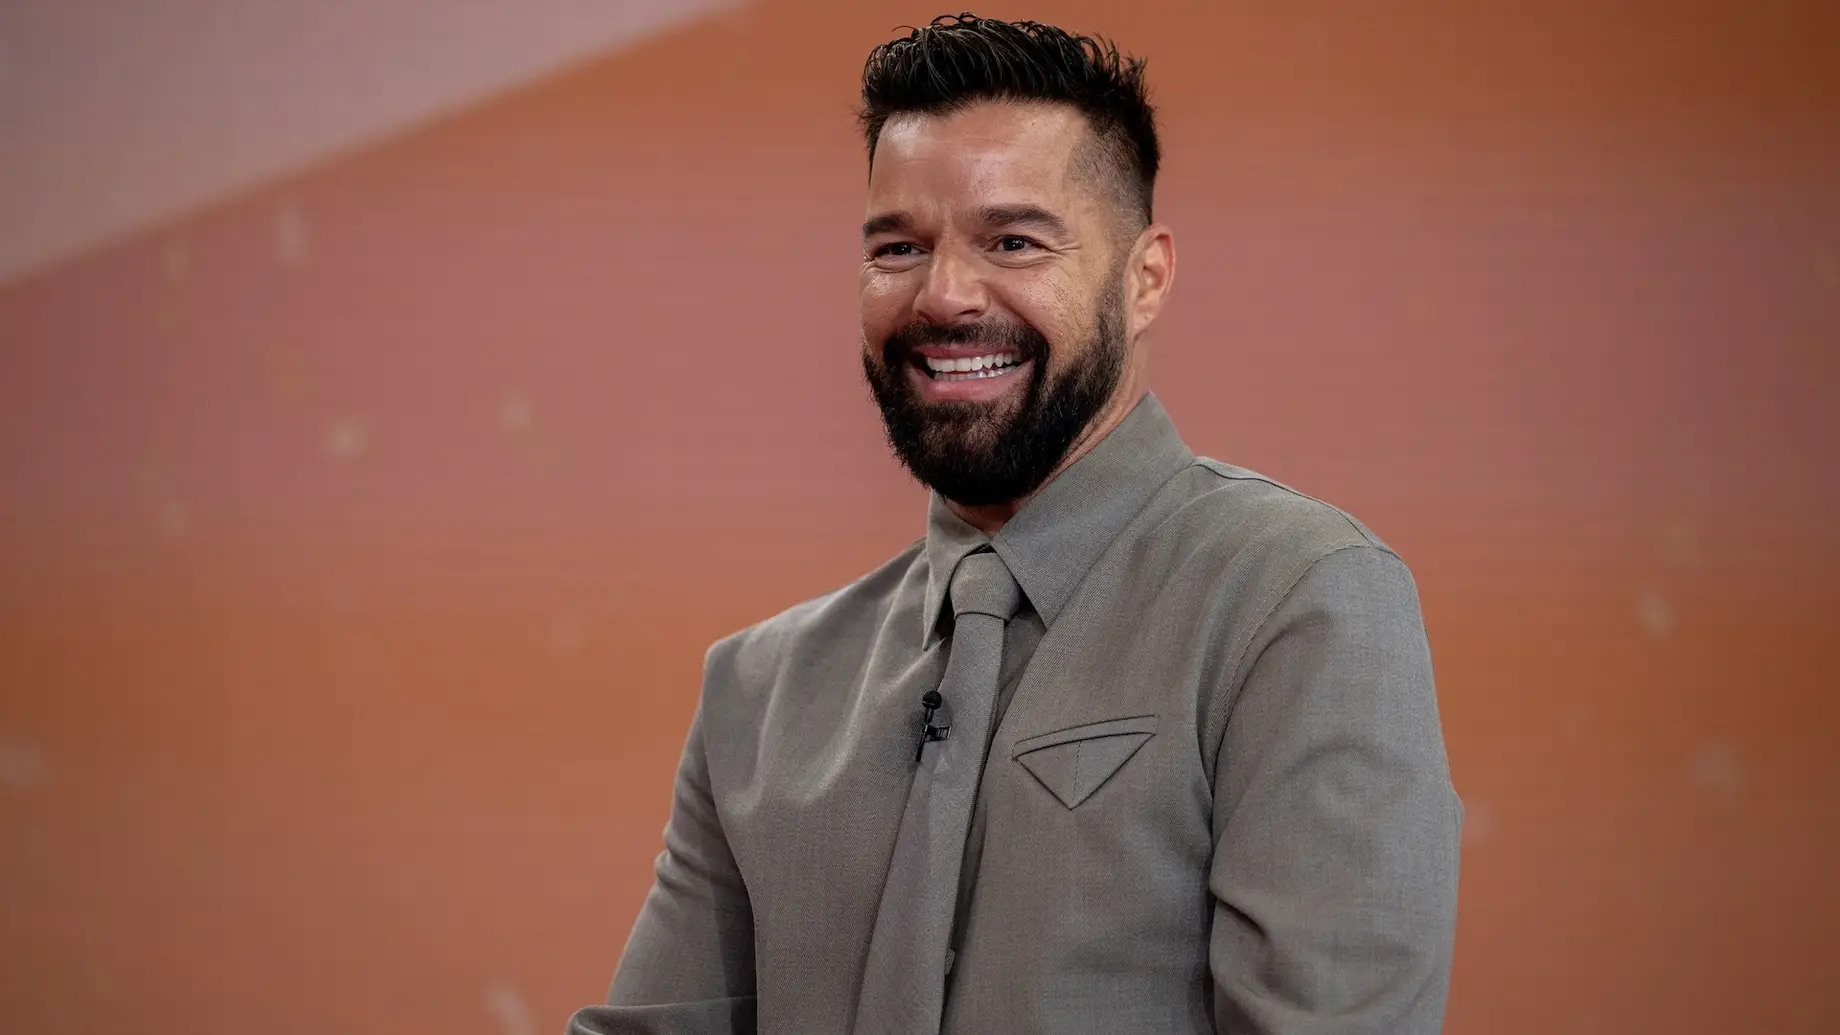 Ricky Martin Says Father Urged Him to Come Out to His Fans, But Team Was Against It